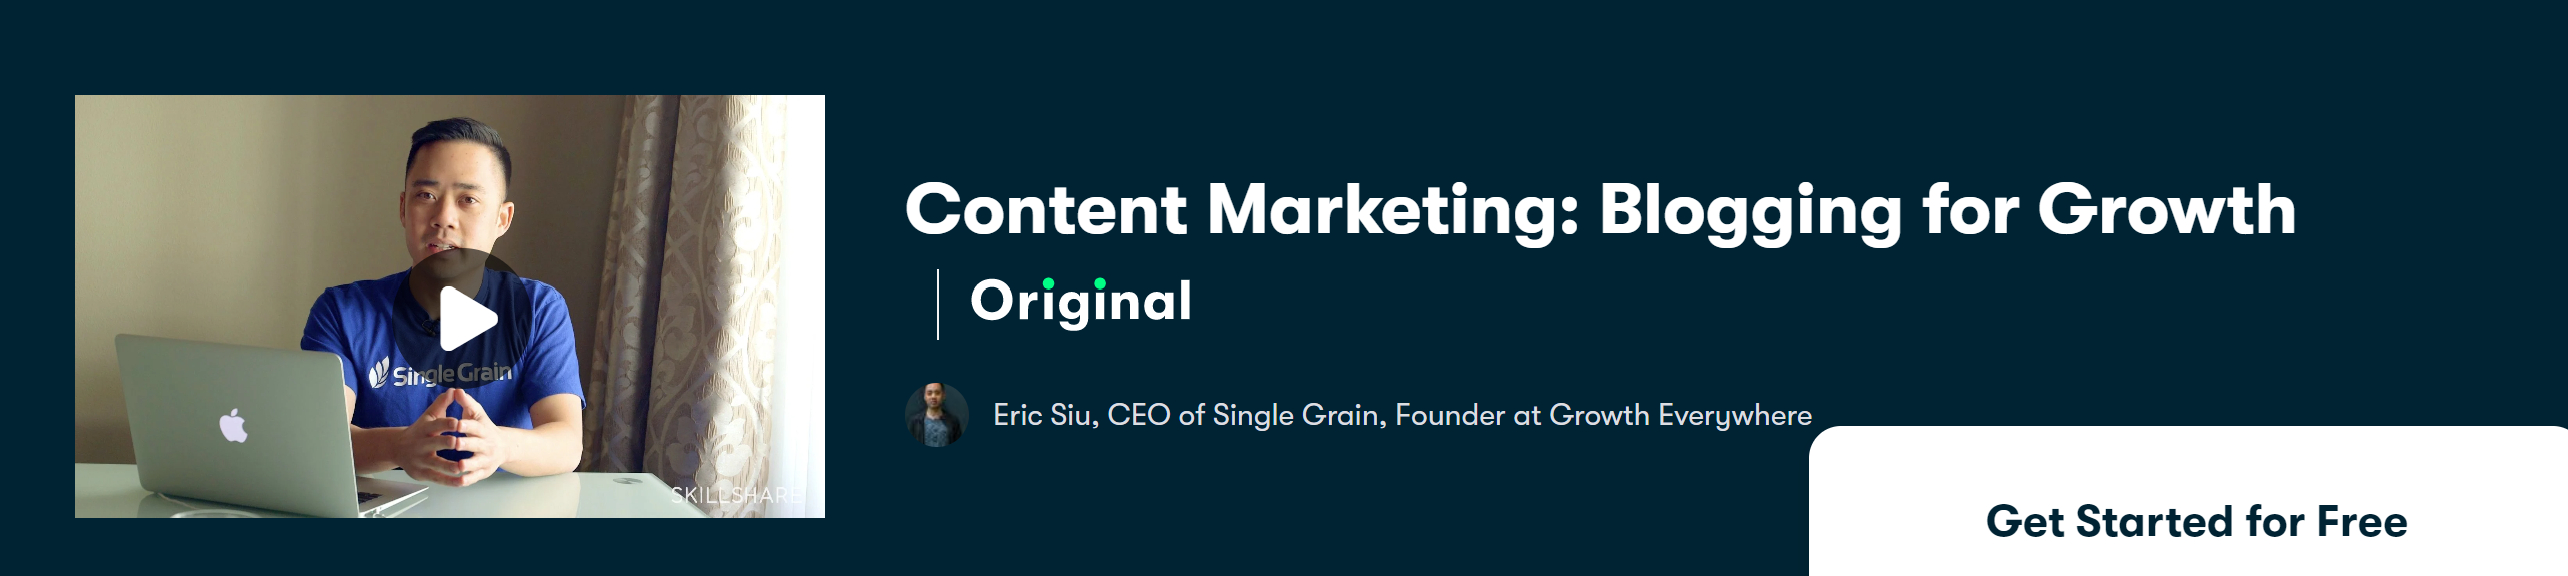 Content Marketing Blogging for Growth